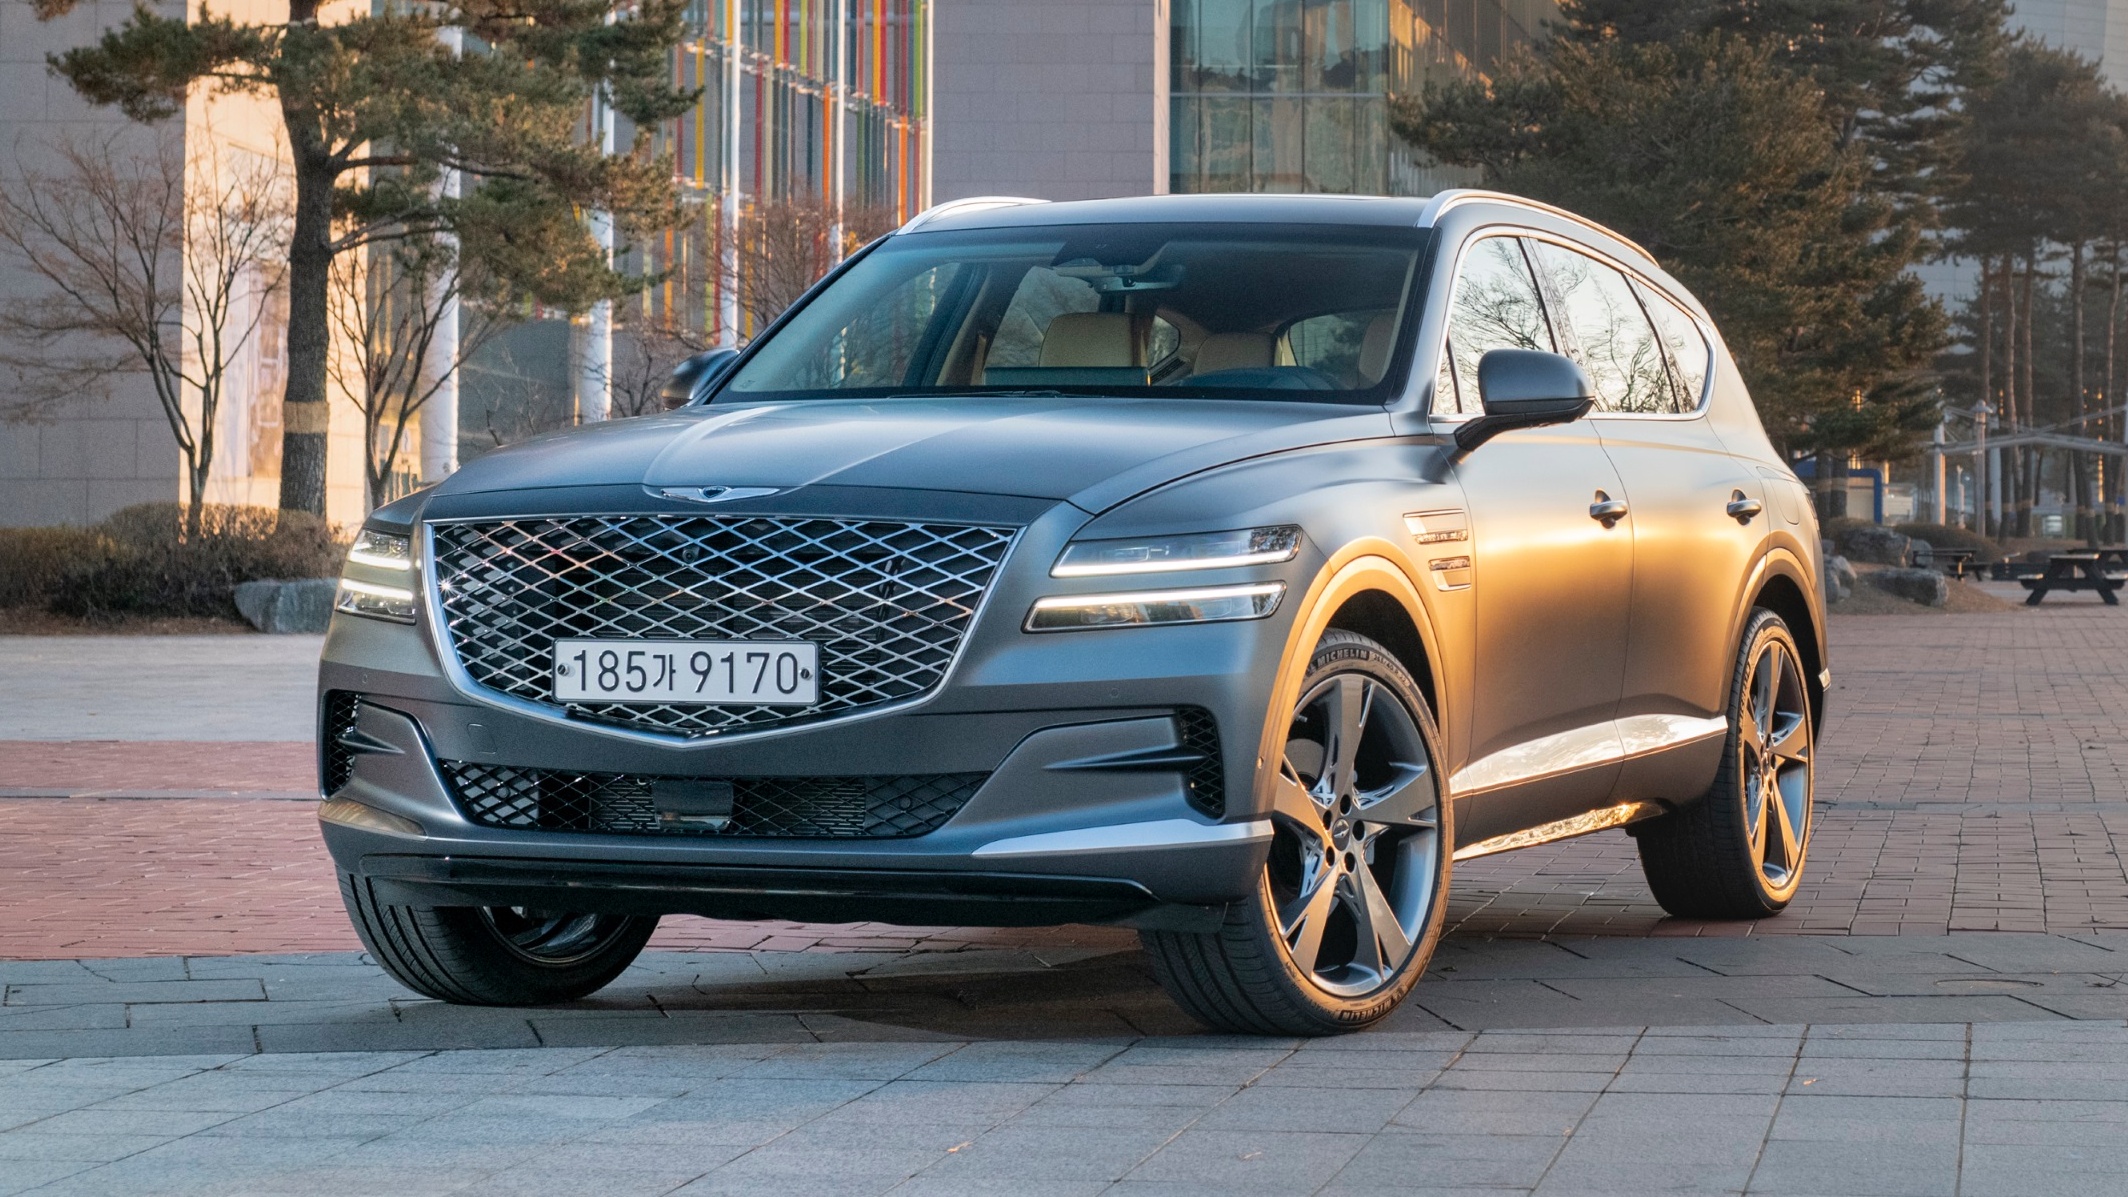 News - Genesis Launches The 2020 GV80 SUV, Australian Debut To Follow